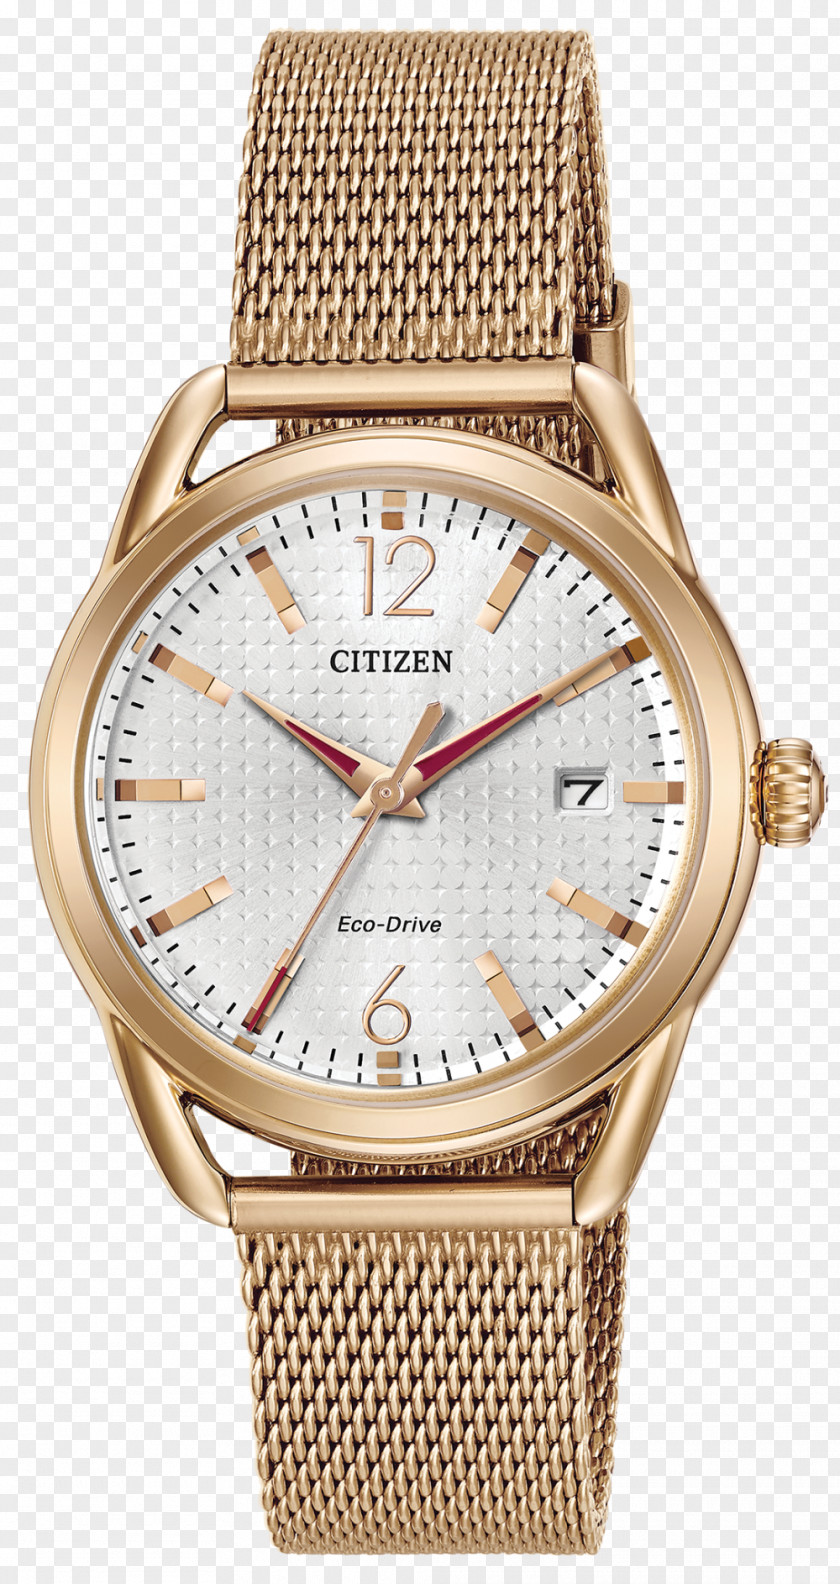 Watch Eco-Drive Citizen Holdings Jewellery Discounts And Allowances PNG